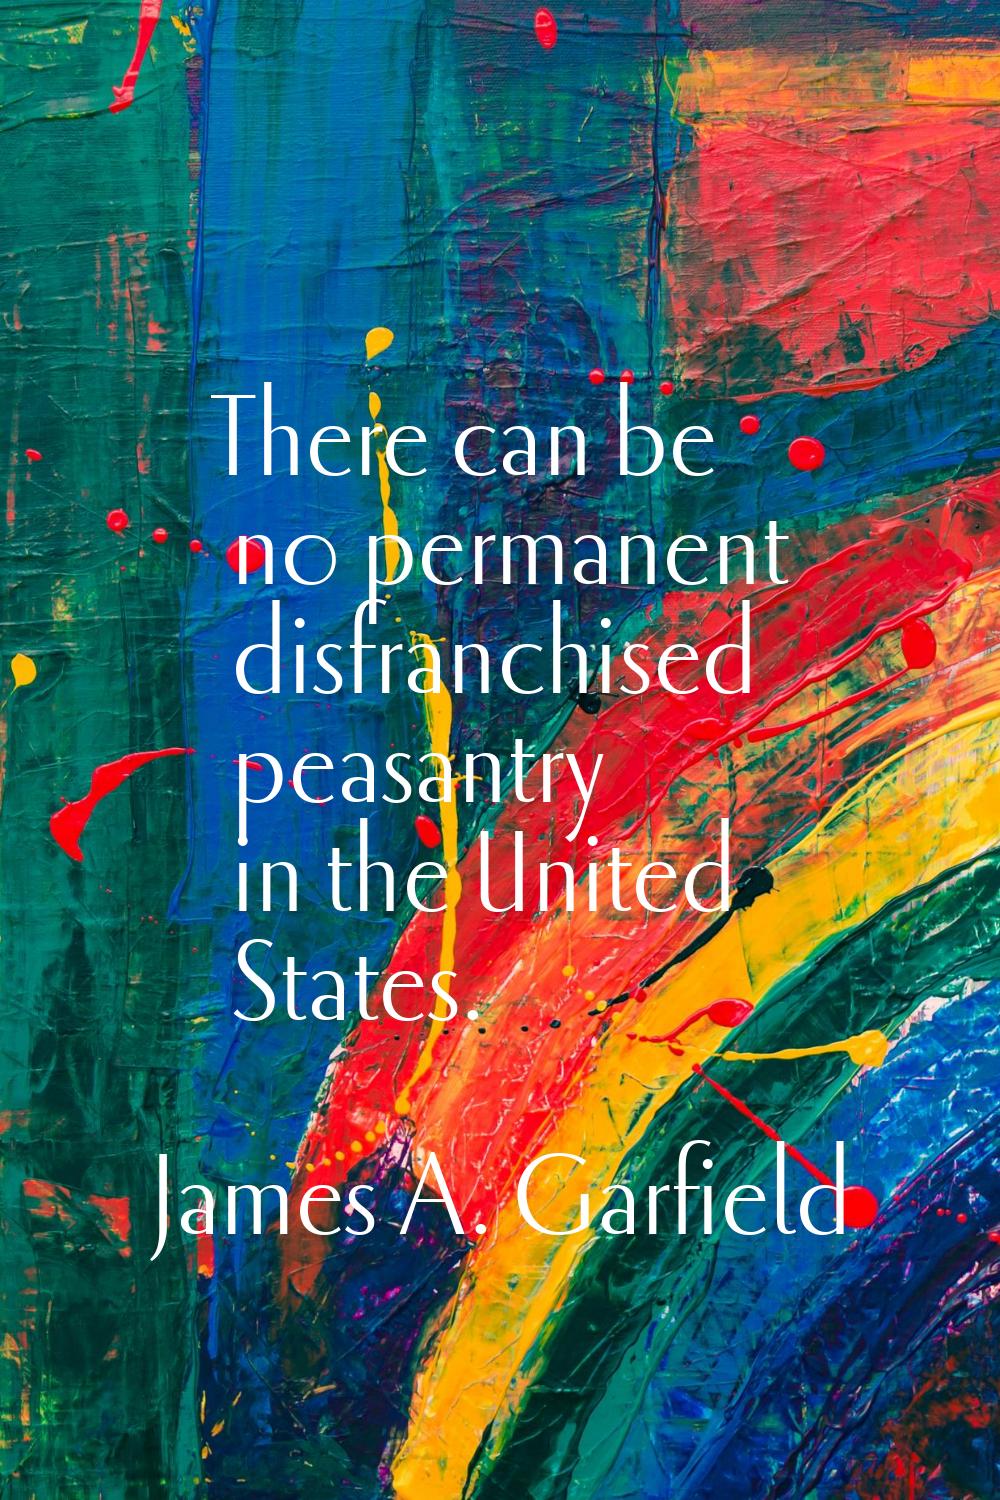 There can be no permanent disfranchised peasantry in the United States.